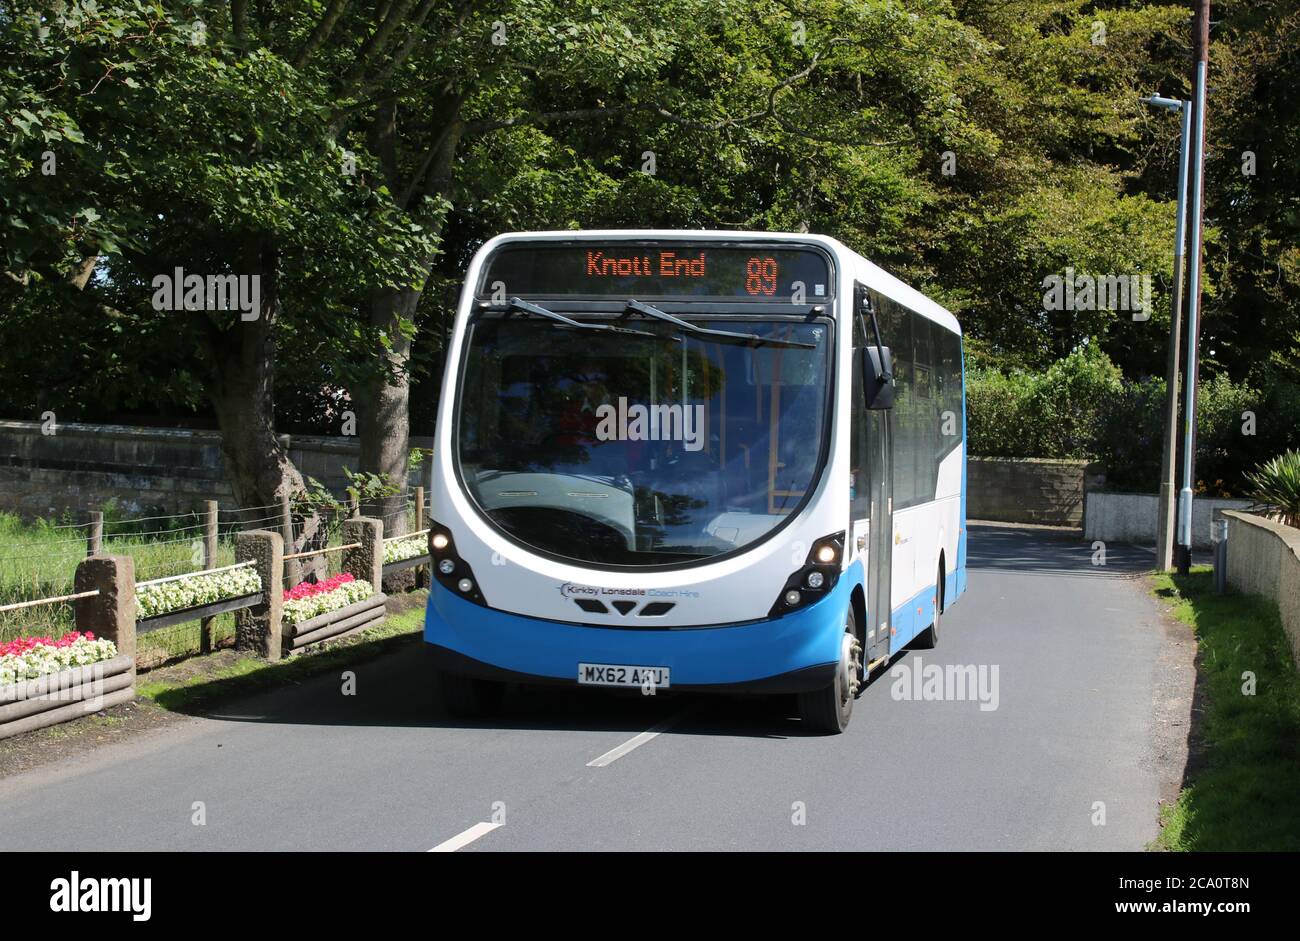 Kirkby Lonsdale Coach hire Wright StreetLite bus on service 89 from Lancaster to Knott End on 24th July 2020 seen on School Lane in Pilling. Stock Photo